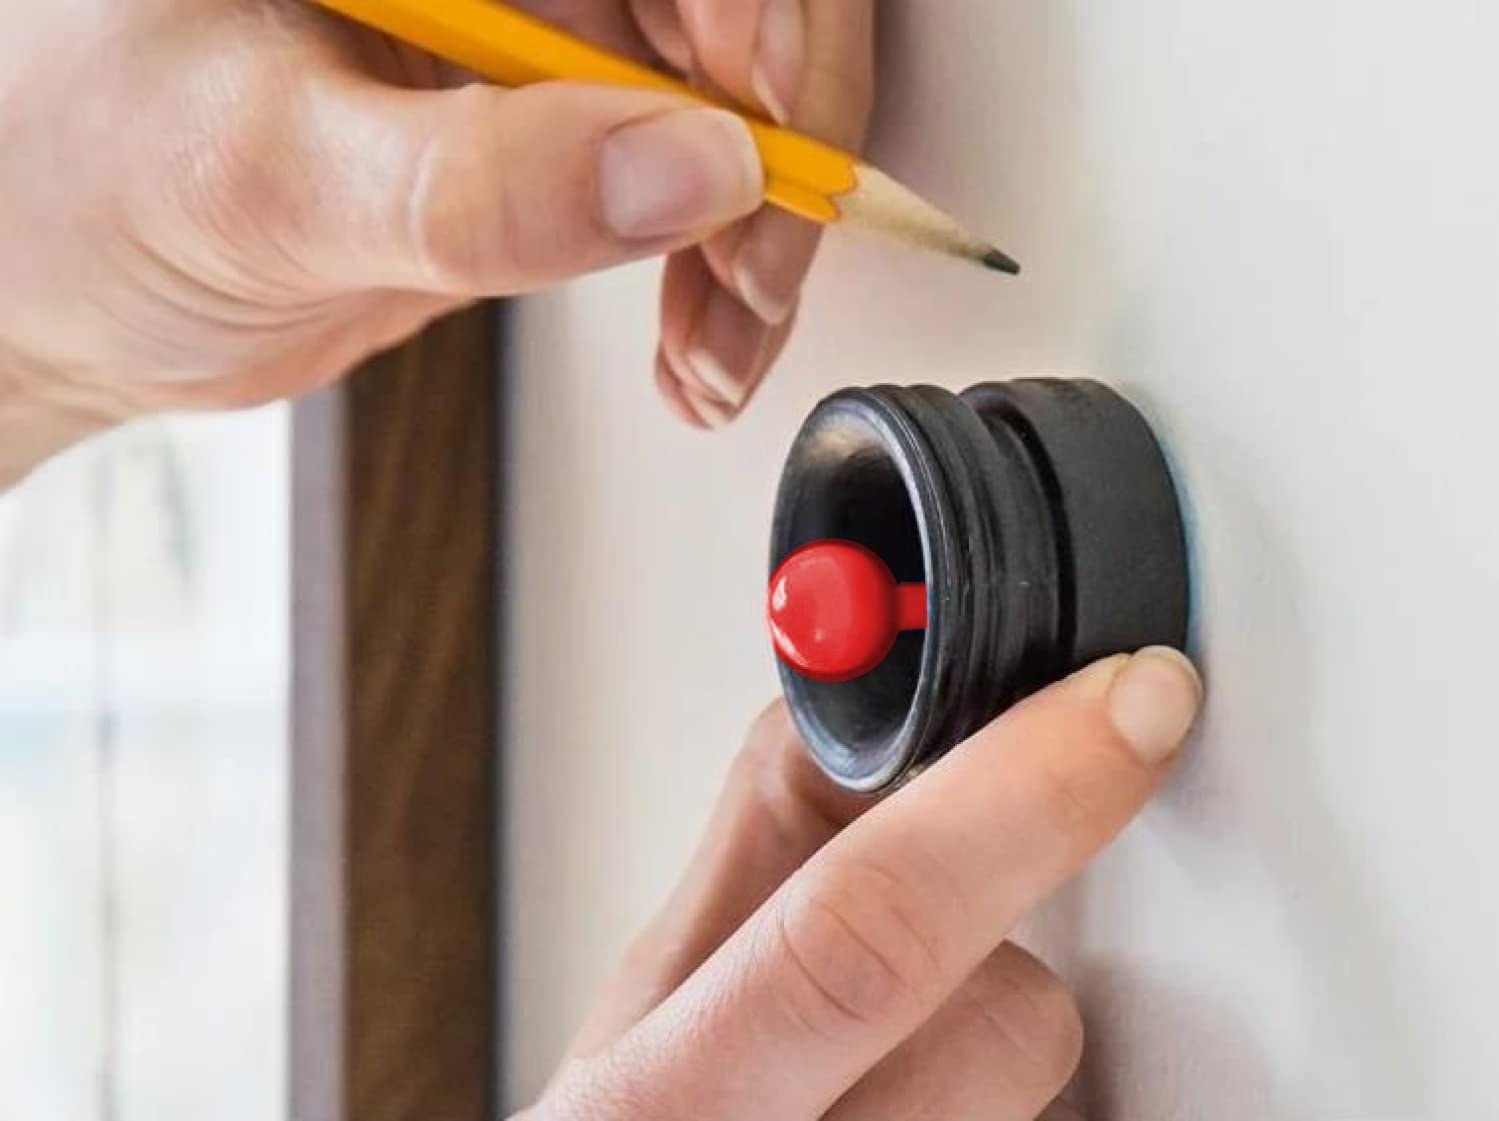 hand using the small round tool with red knob against a wall